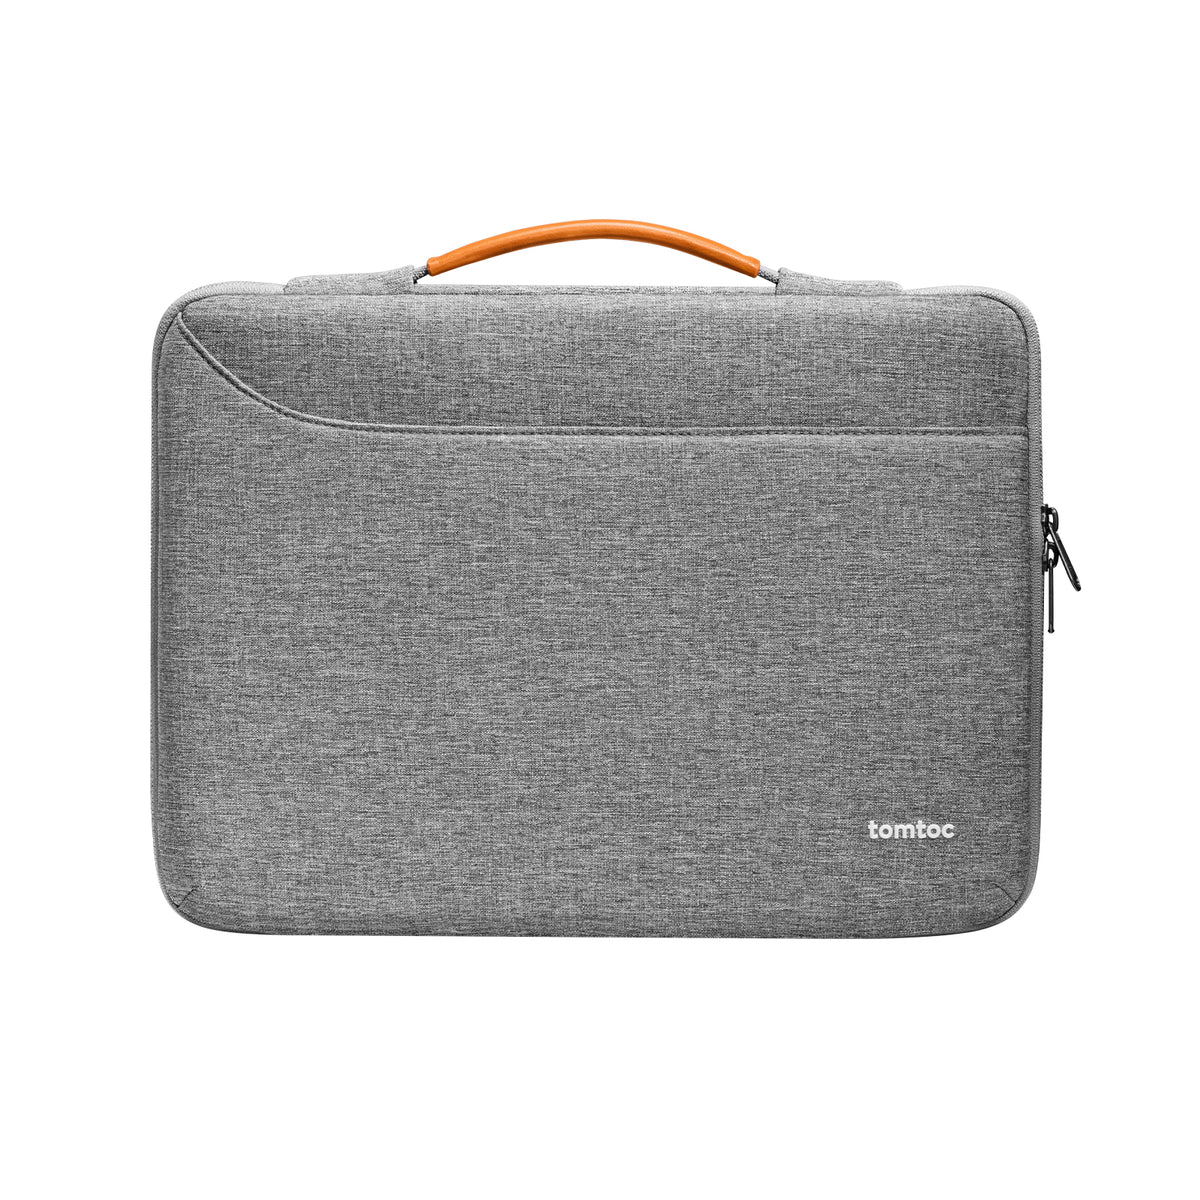 primary_Defender-A22 Laptop Briefcase For 14-inch MacBook Pro